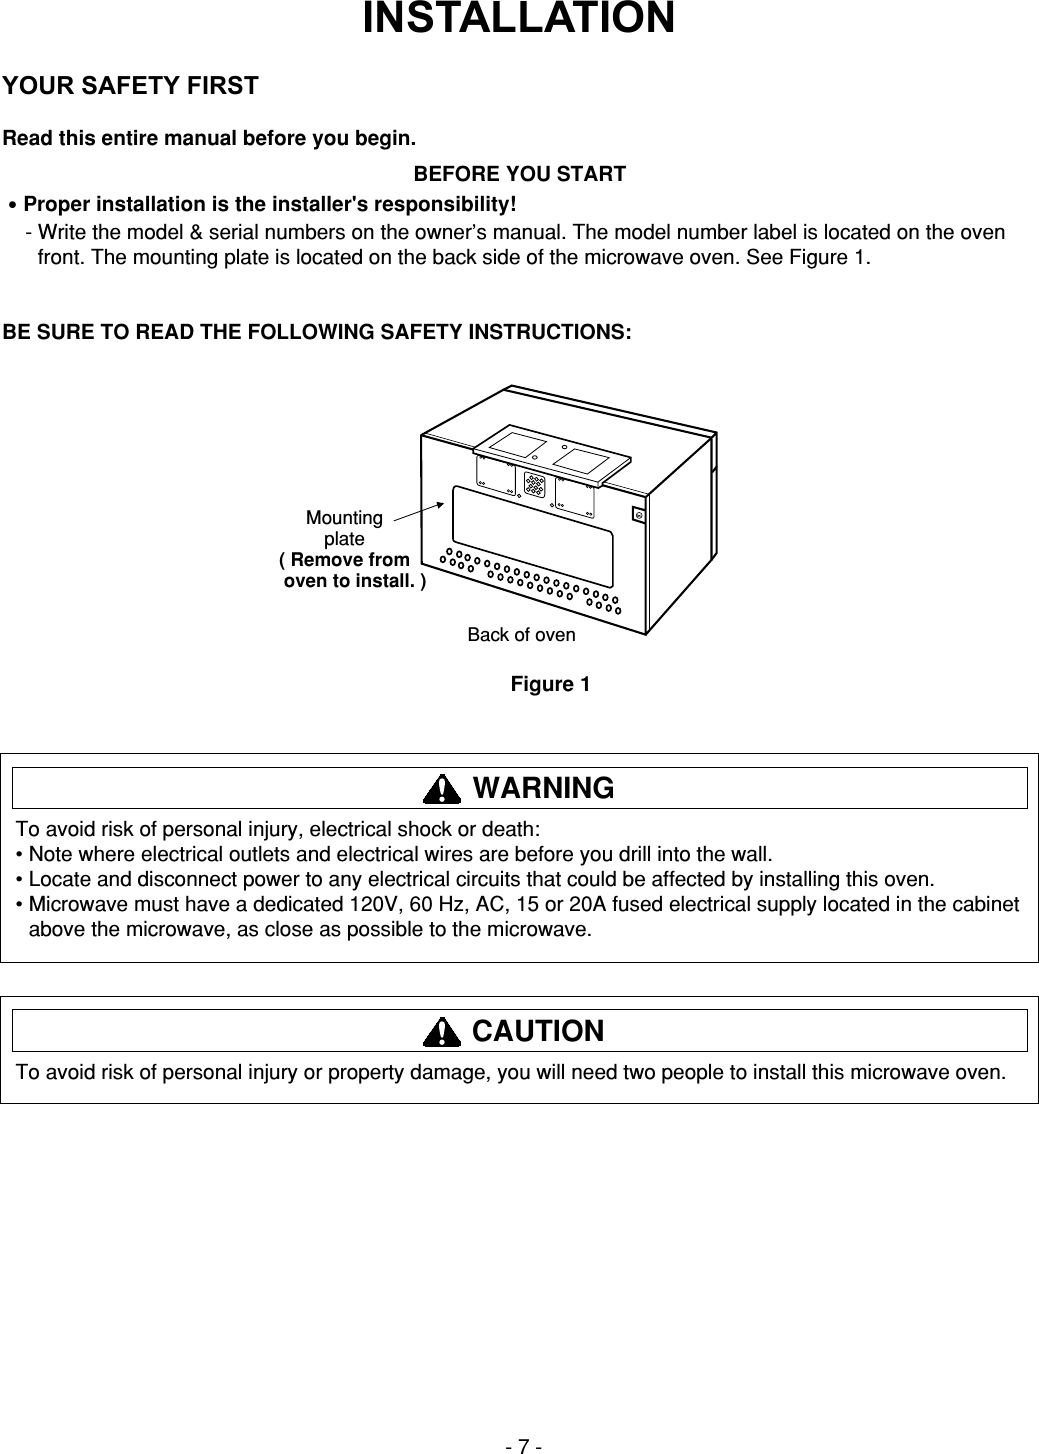 - 7 -INSTALLATIONRead this entire manual before you begin.BEFORE YOU START•Proper installation is the installer&apos;s responsibility!- Write the model &amp; serial numbers on the owner’s manual. The model number label is located on the ovenfront. The mounting plate is located on the back side of the microwave oven. See Figure 1.BE SURE TO READ THE FOLLOWING SAFETY INSTRUCTIONS:YOUR SAFETY FIRSTMountingplate( Remove from    oven to install. )Back of ovenFigure 1To avoid risk of personal injury, electrical shock or death:• Note where electrical outlets and electrical wires are before you drill into the wall.• Locate and disconnect power to any electrical circuits that could be affected by installing this oven.• Microwave must have a dedicated 120V, 60 Hz, AC, 15 or 20A fused electrical supply located in the cabinetabove the microwave, as close as possible to the microwave.WARNINGTo avoid risk of personal injury or property damage, you will need two people to install this microwave oven.CAUTION